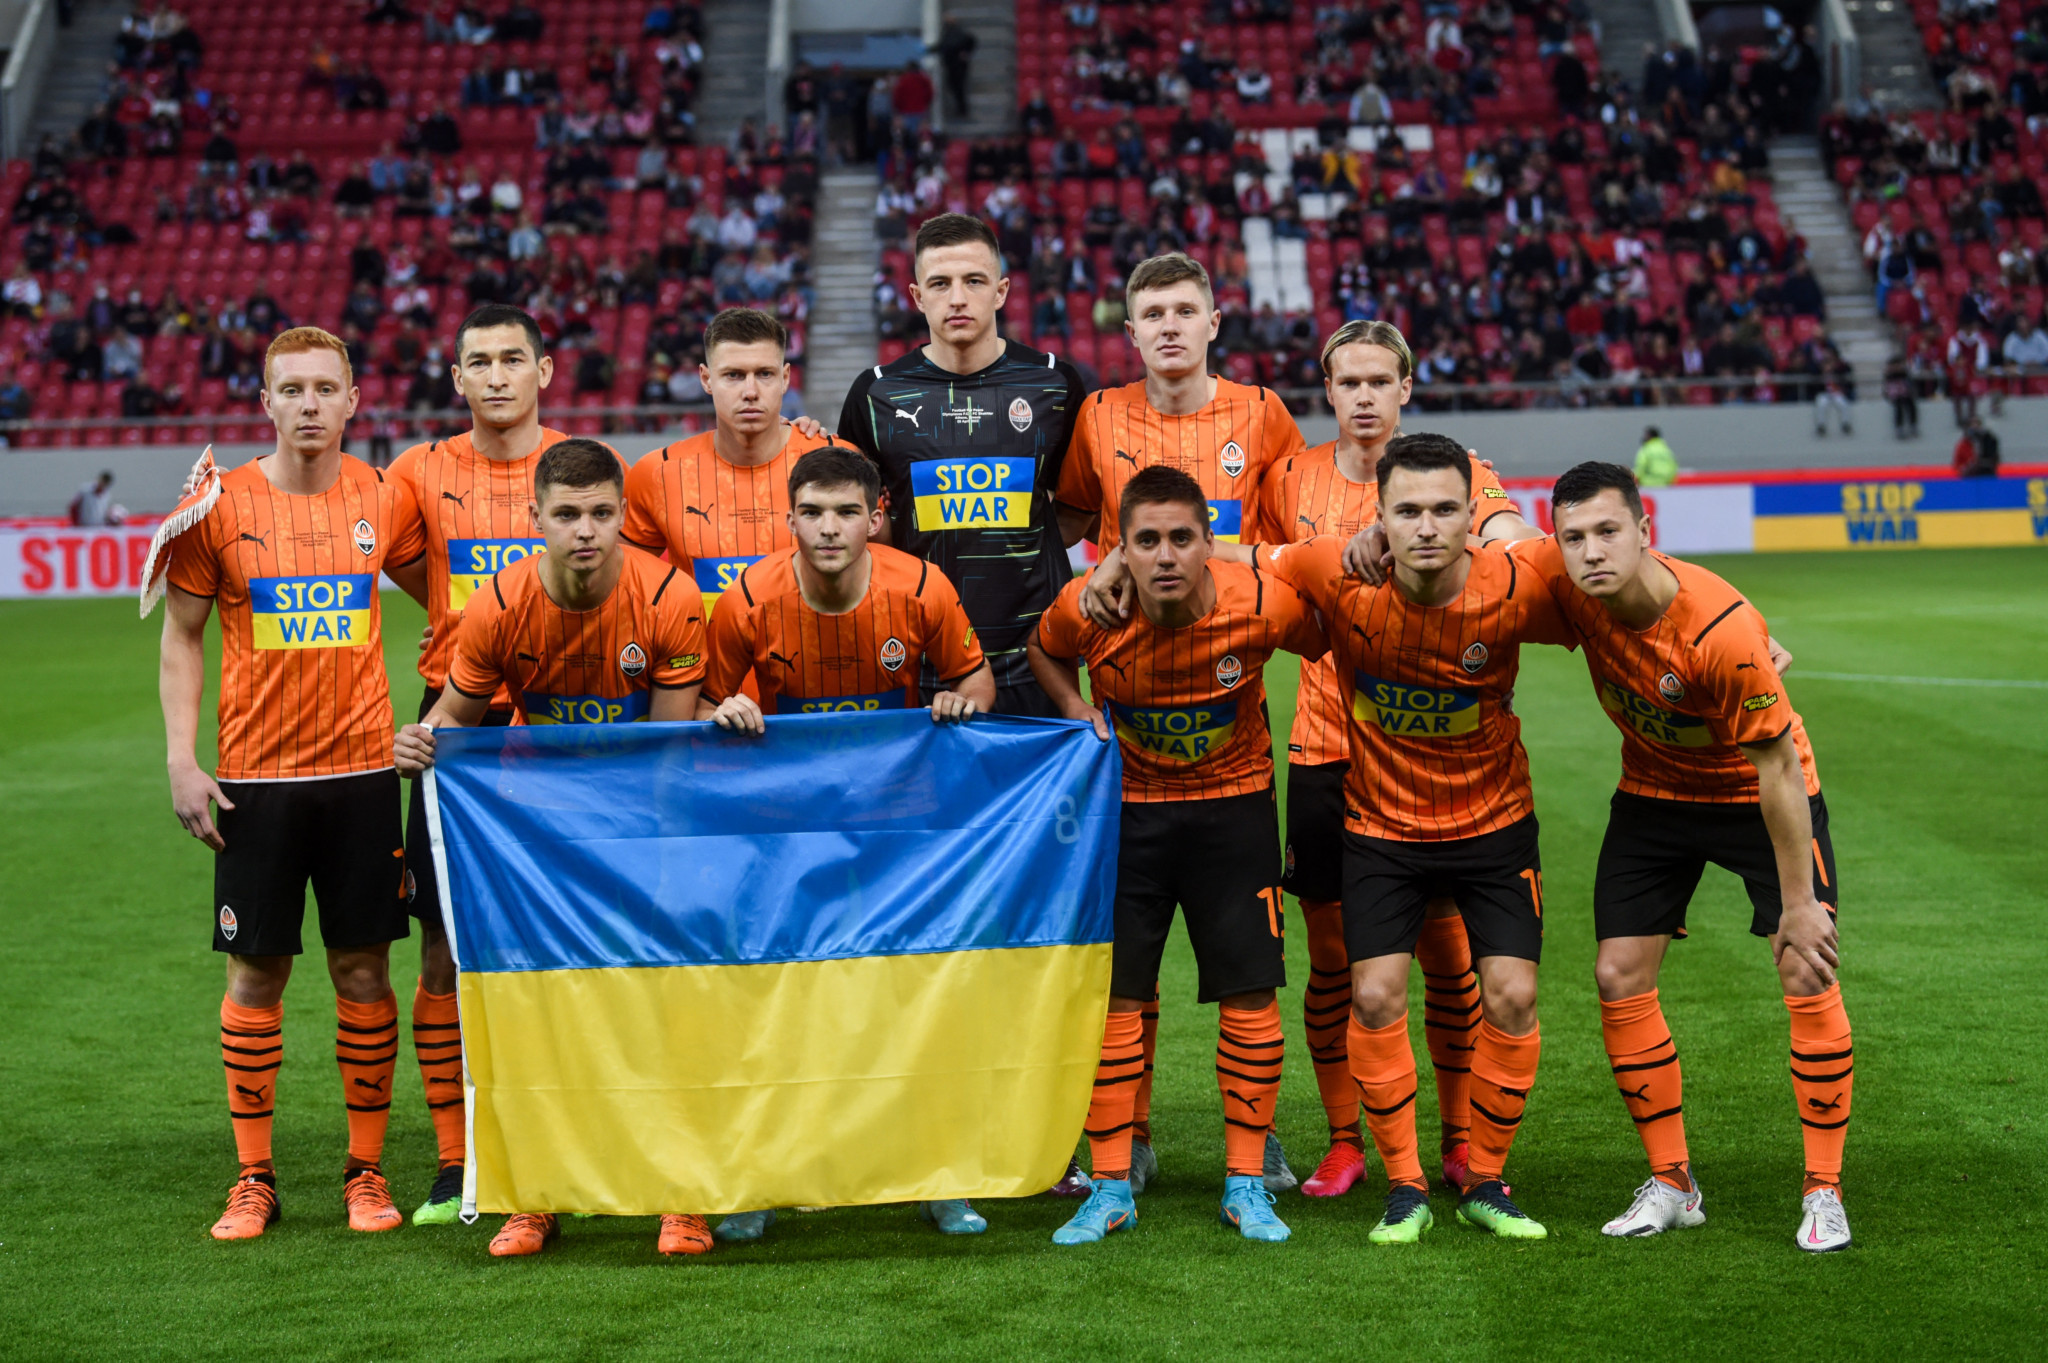 Shakhtar Donetsk have not played in their home city since 2014 due to Russia's invasion of the Donbas region in eastern Ukraine ©Getty Images